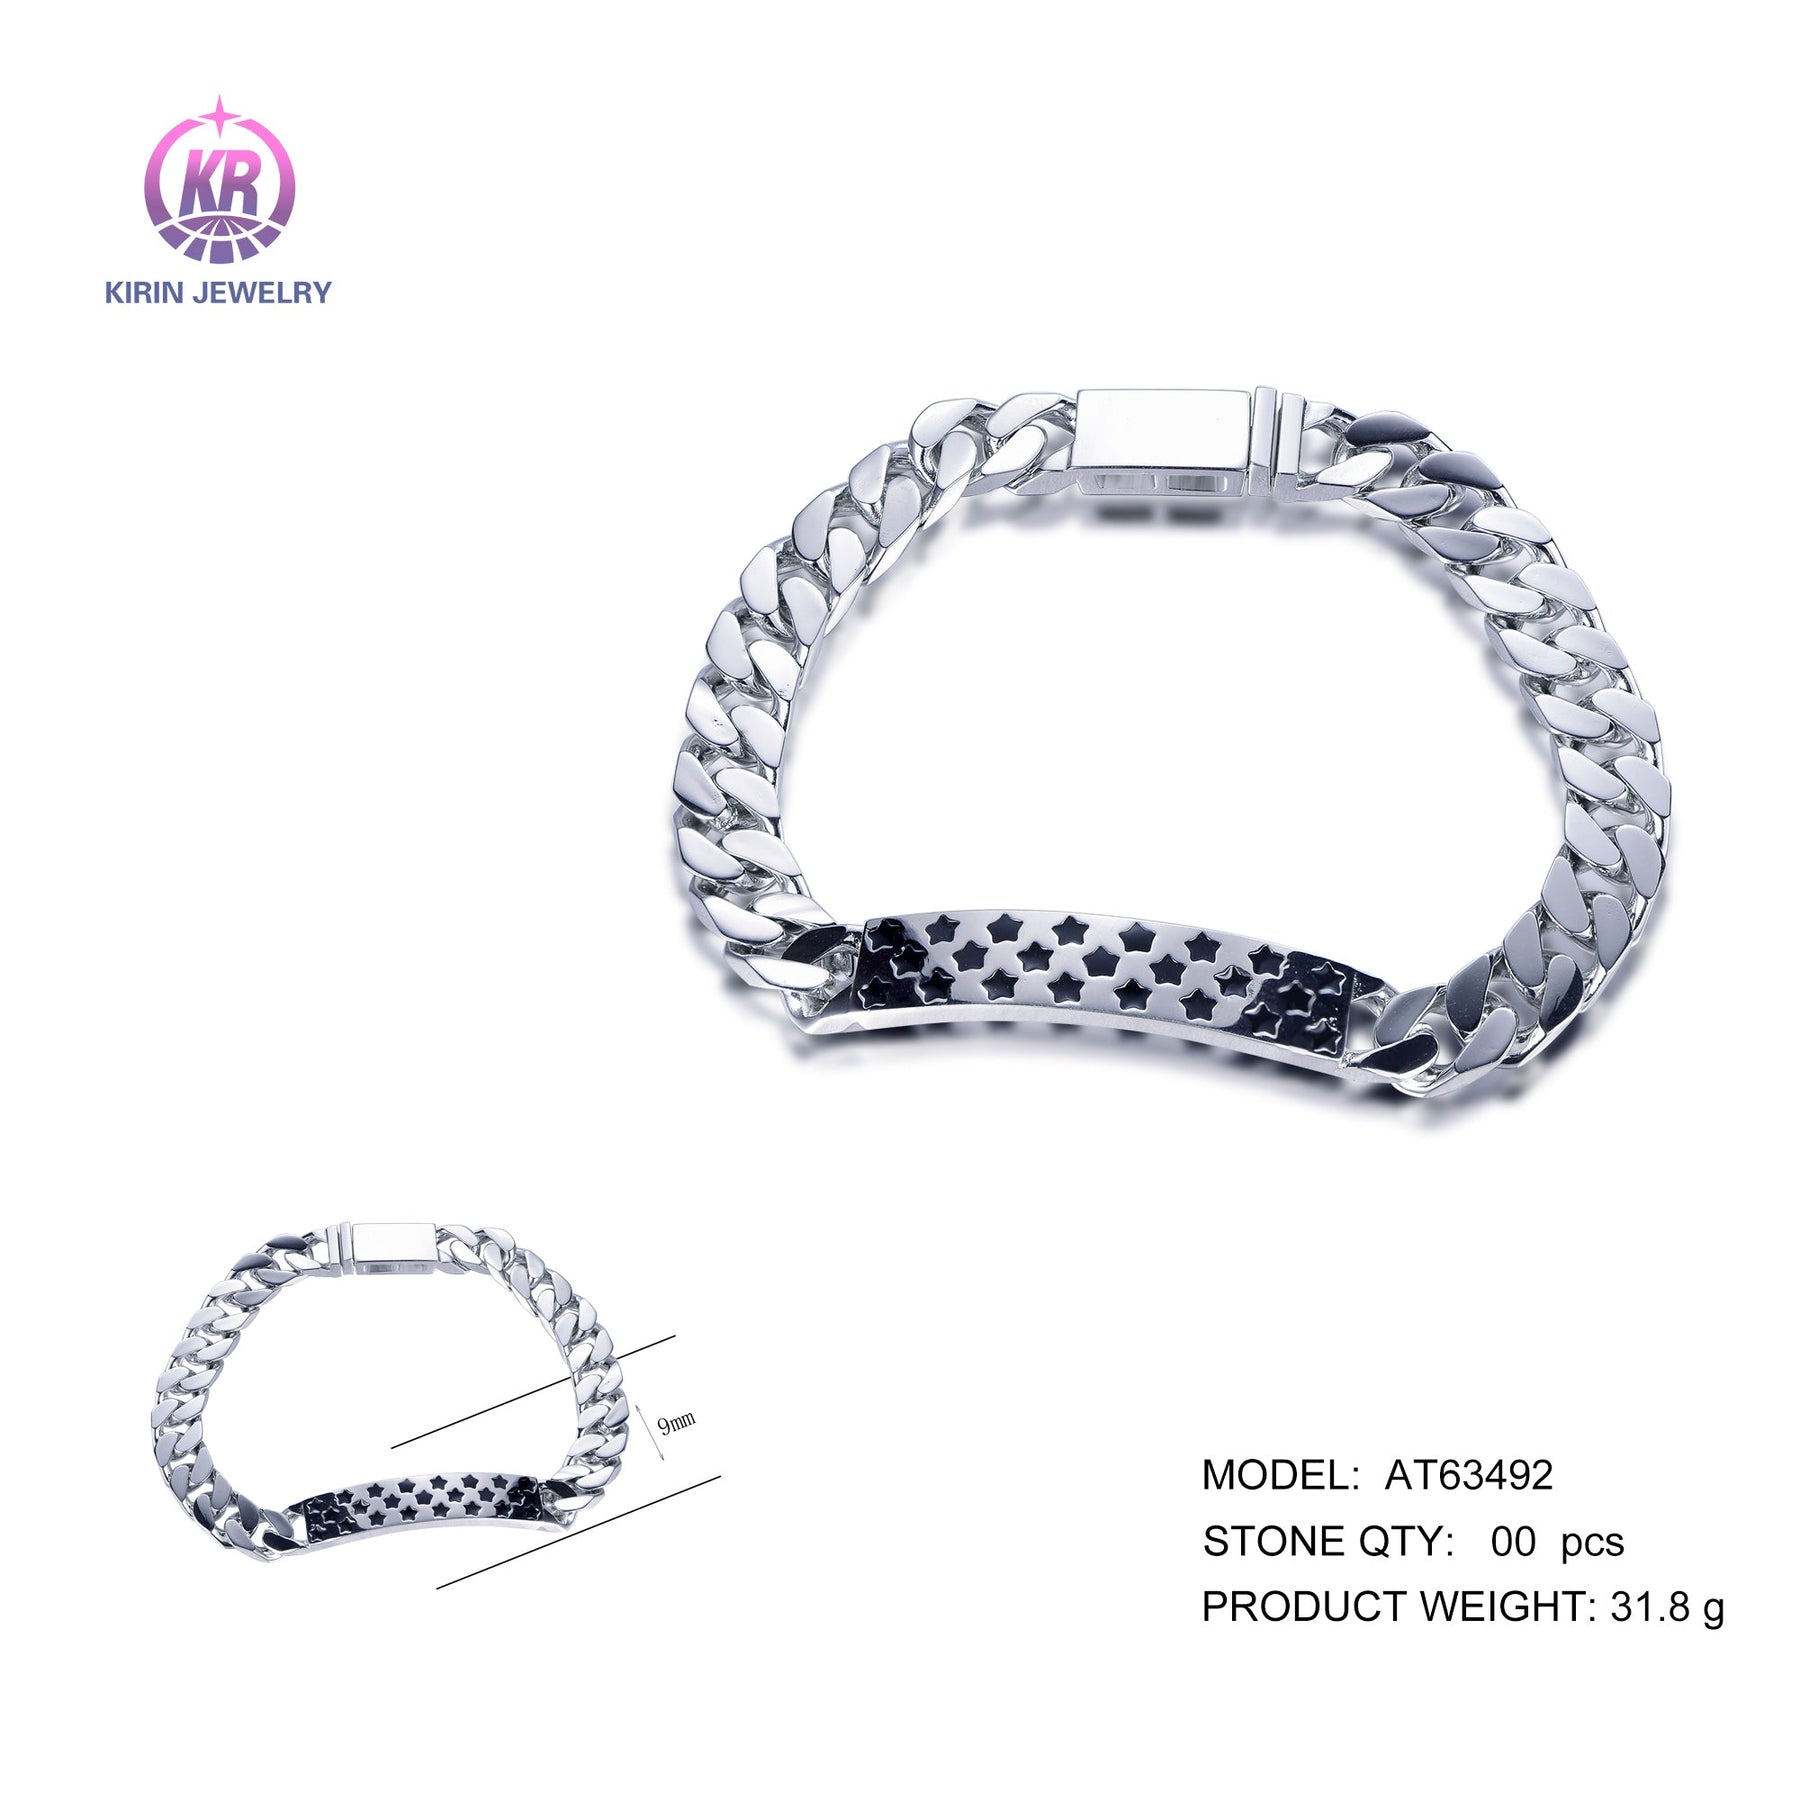 925 silver bracelet with rhodium plating AT63492